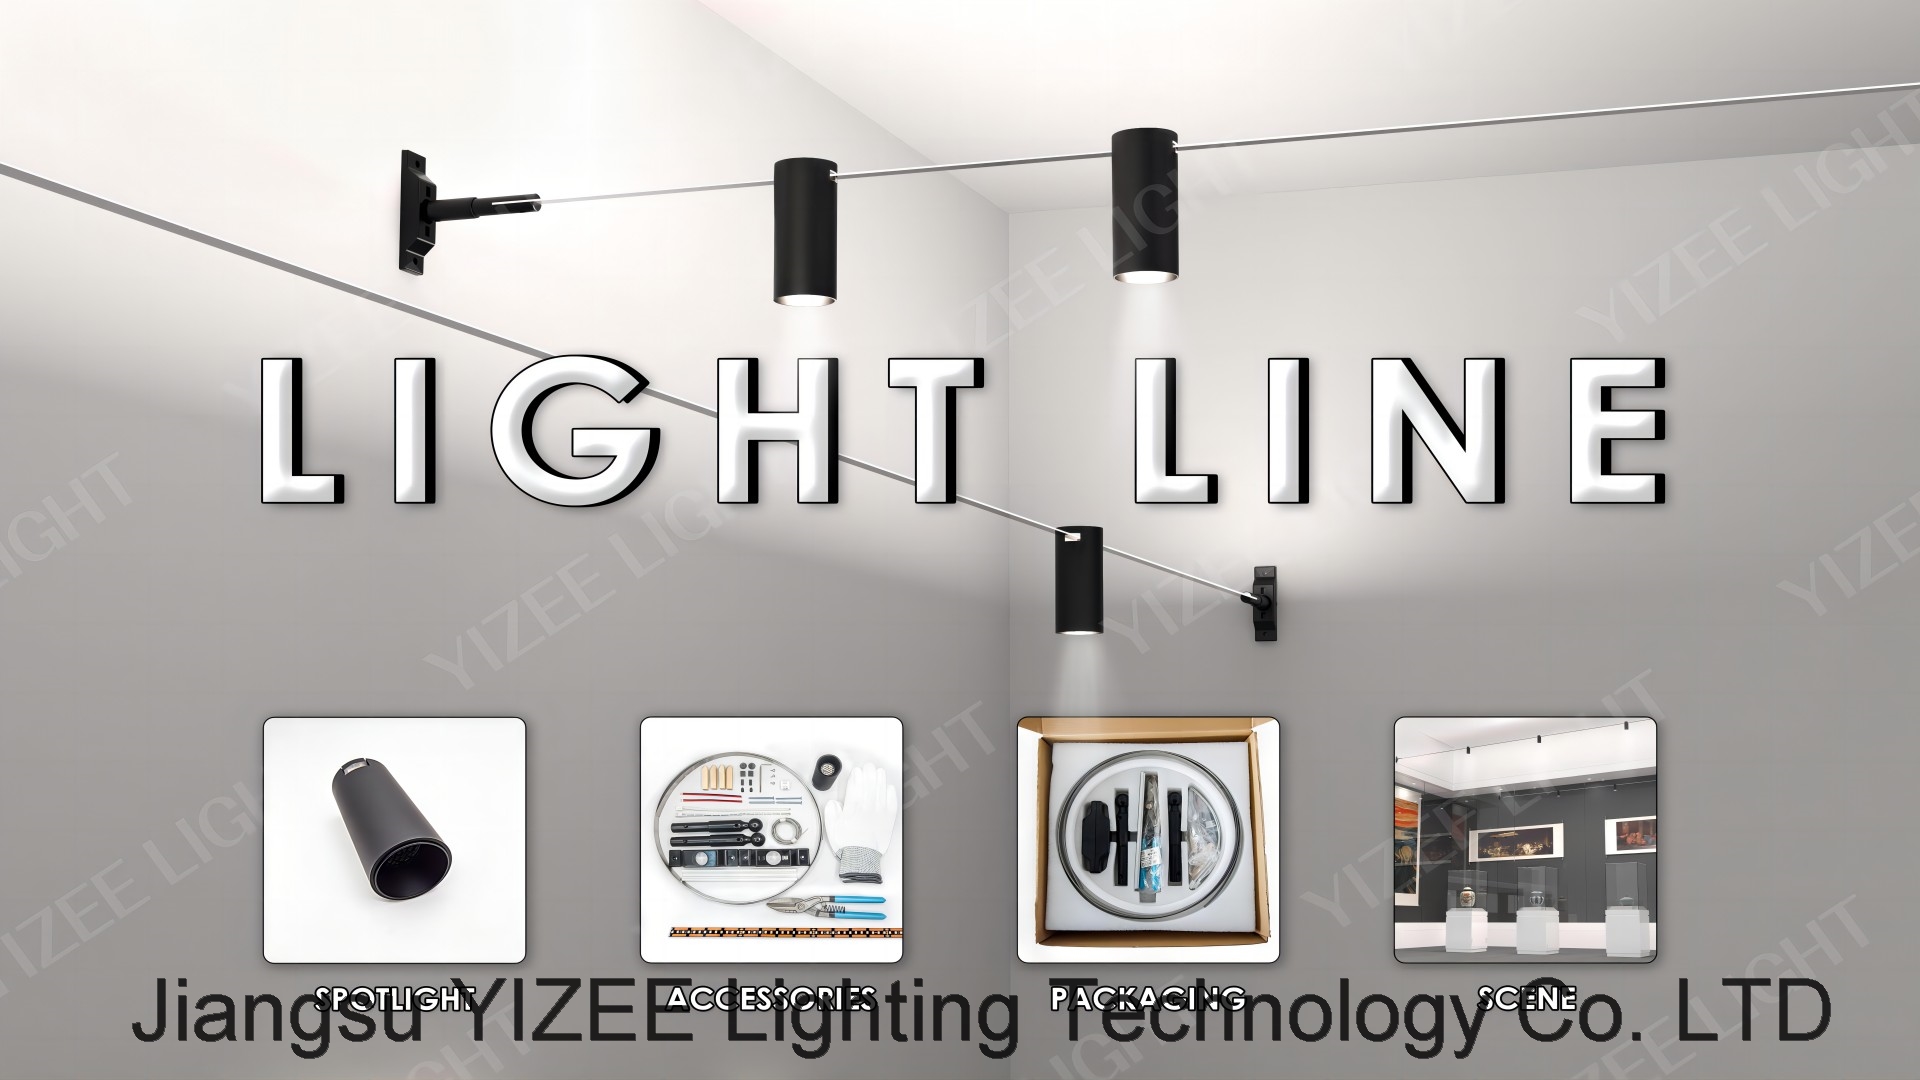 New Skyline Linear Lighting with Spot Lights for Accent Lighting